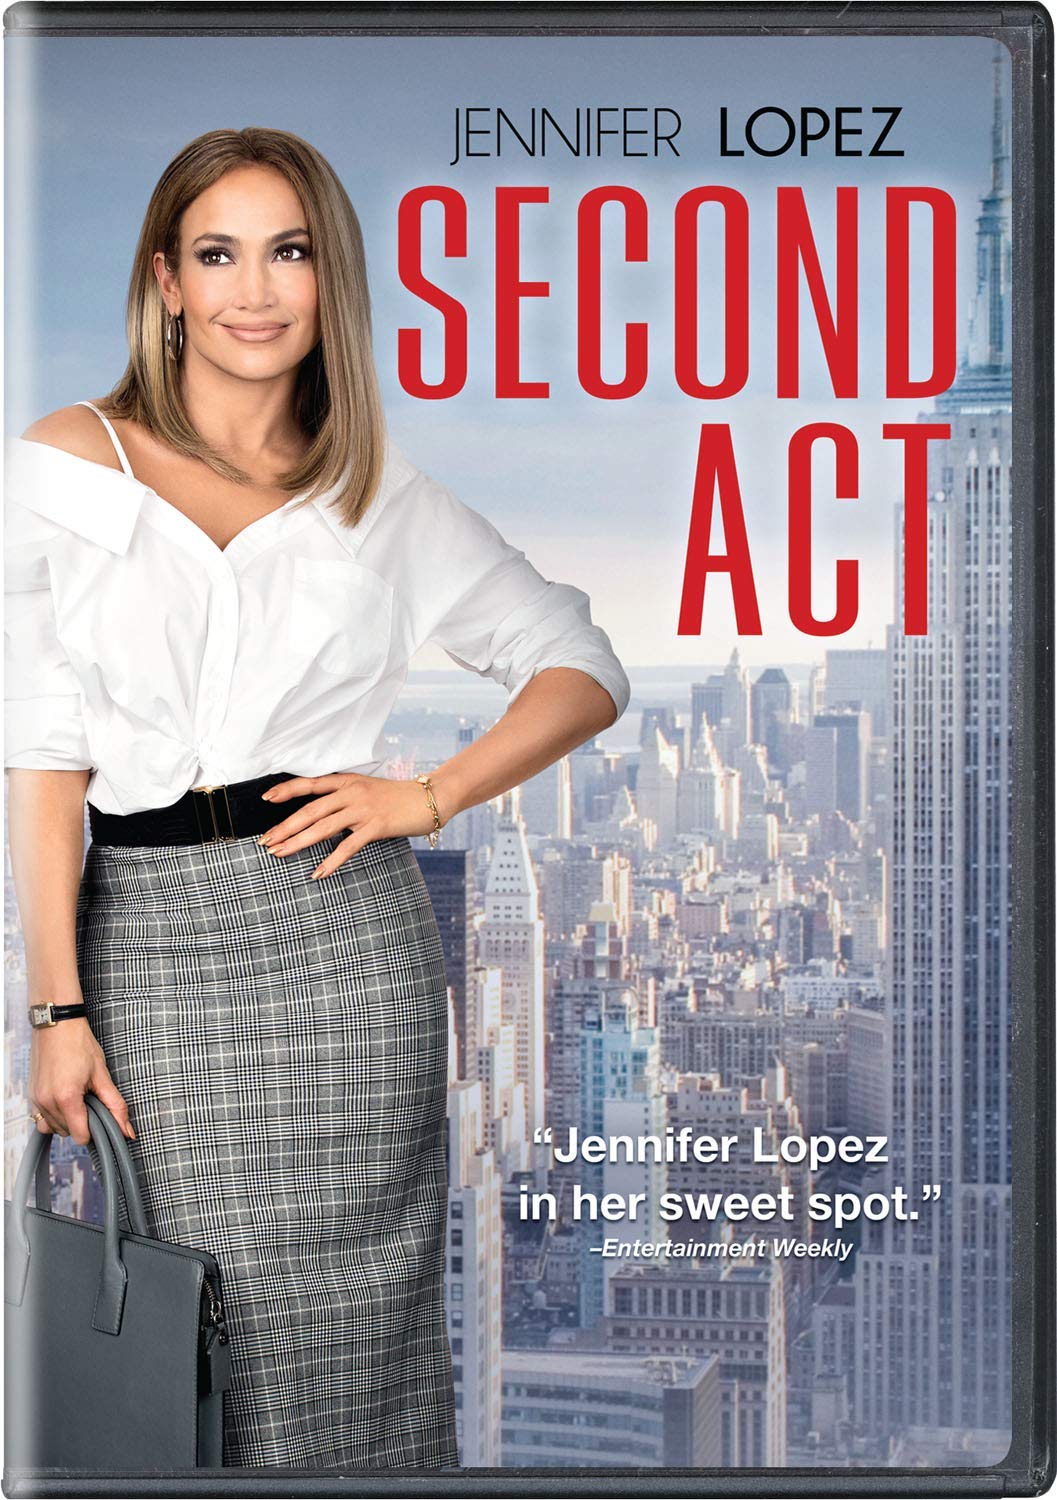 Second Act (2018)